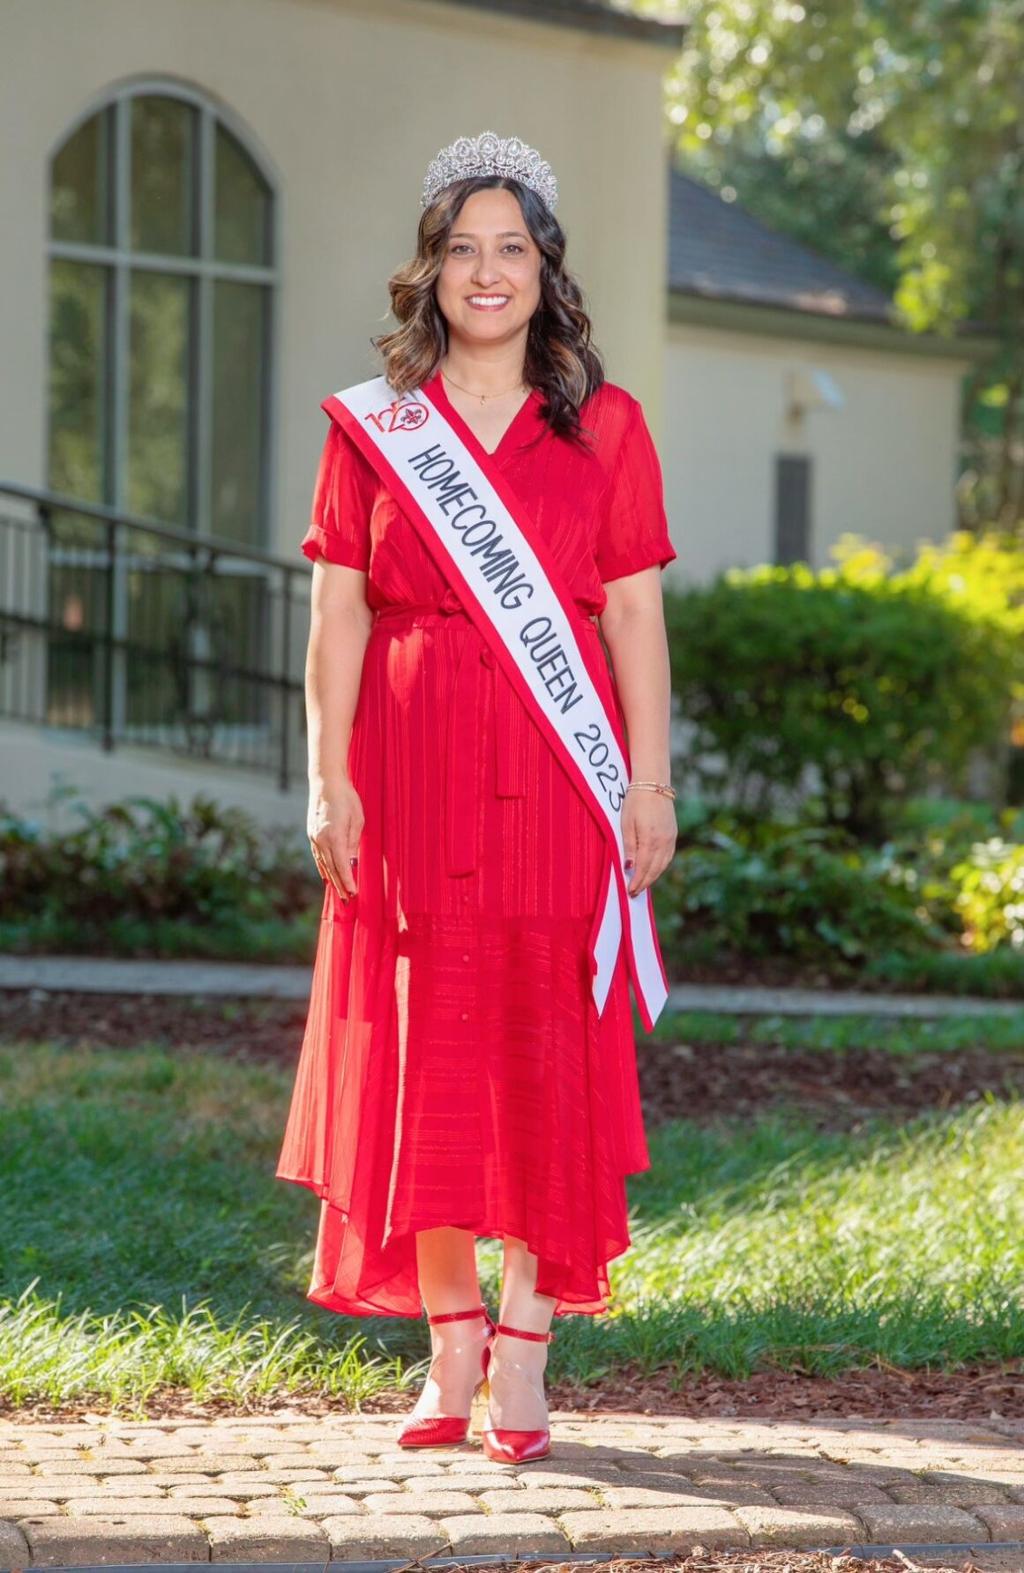 The 2023 UL Homecoming Queen is a full-time mom and graduate